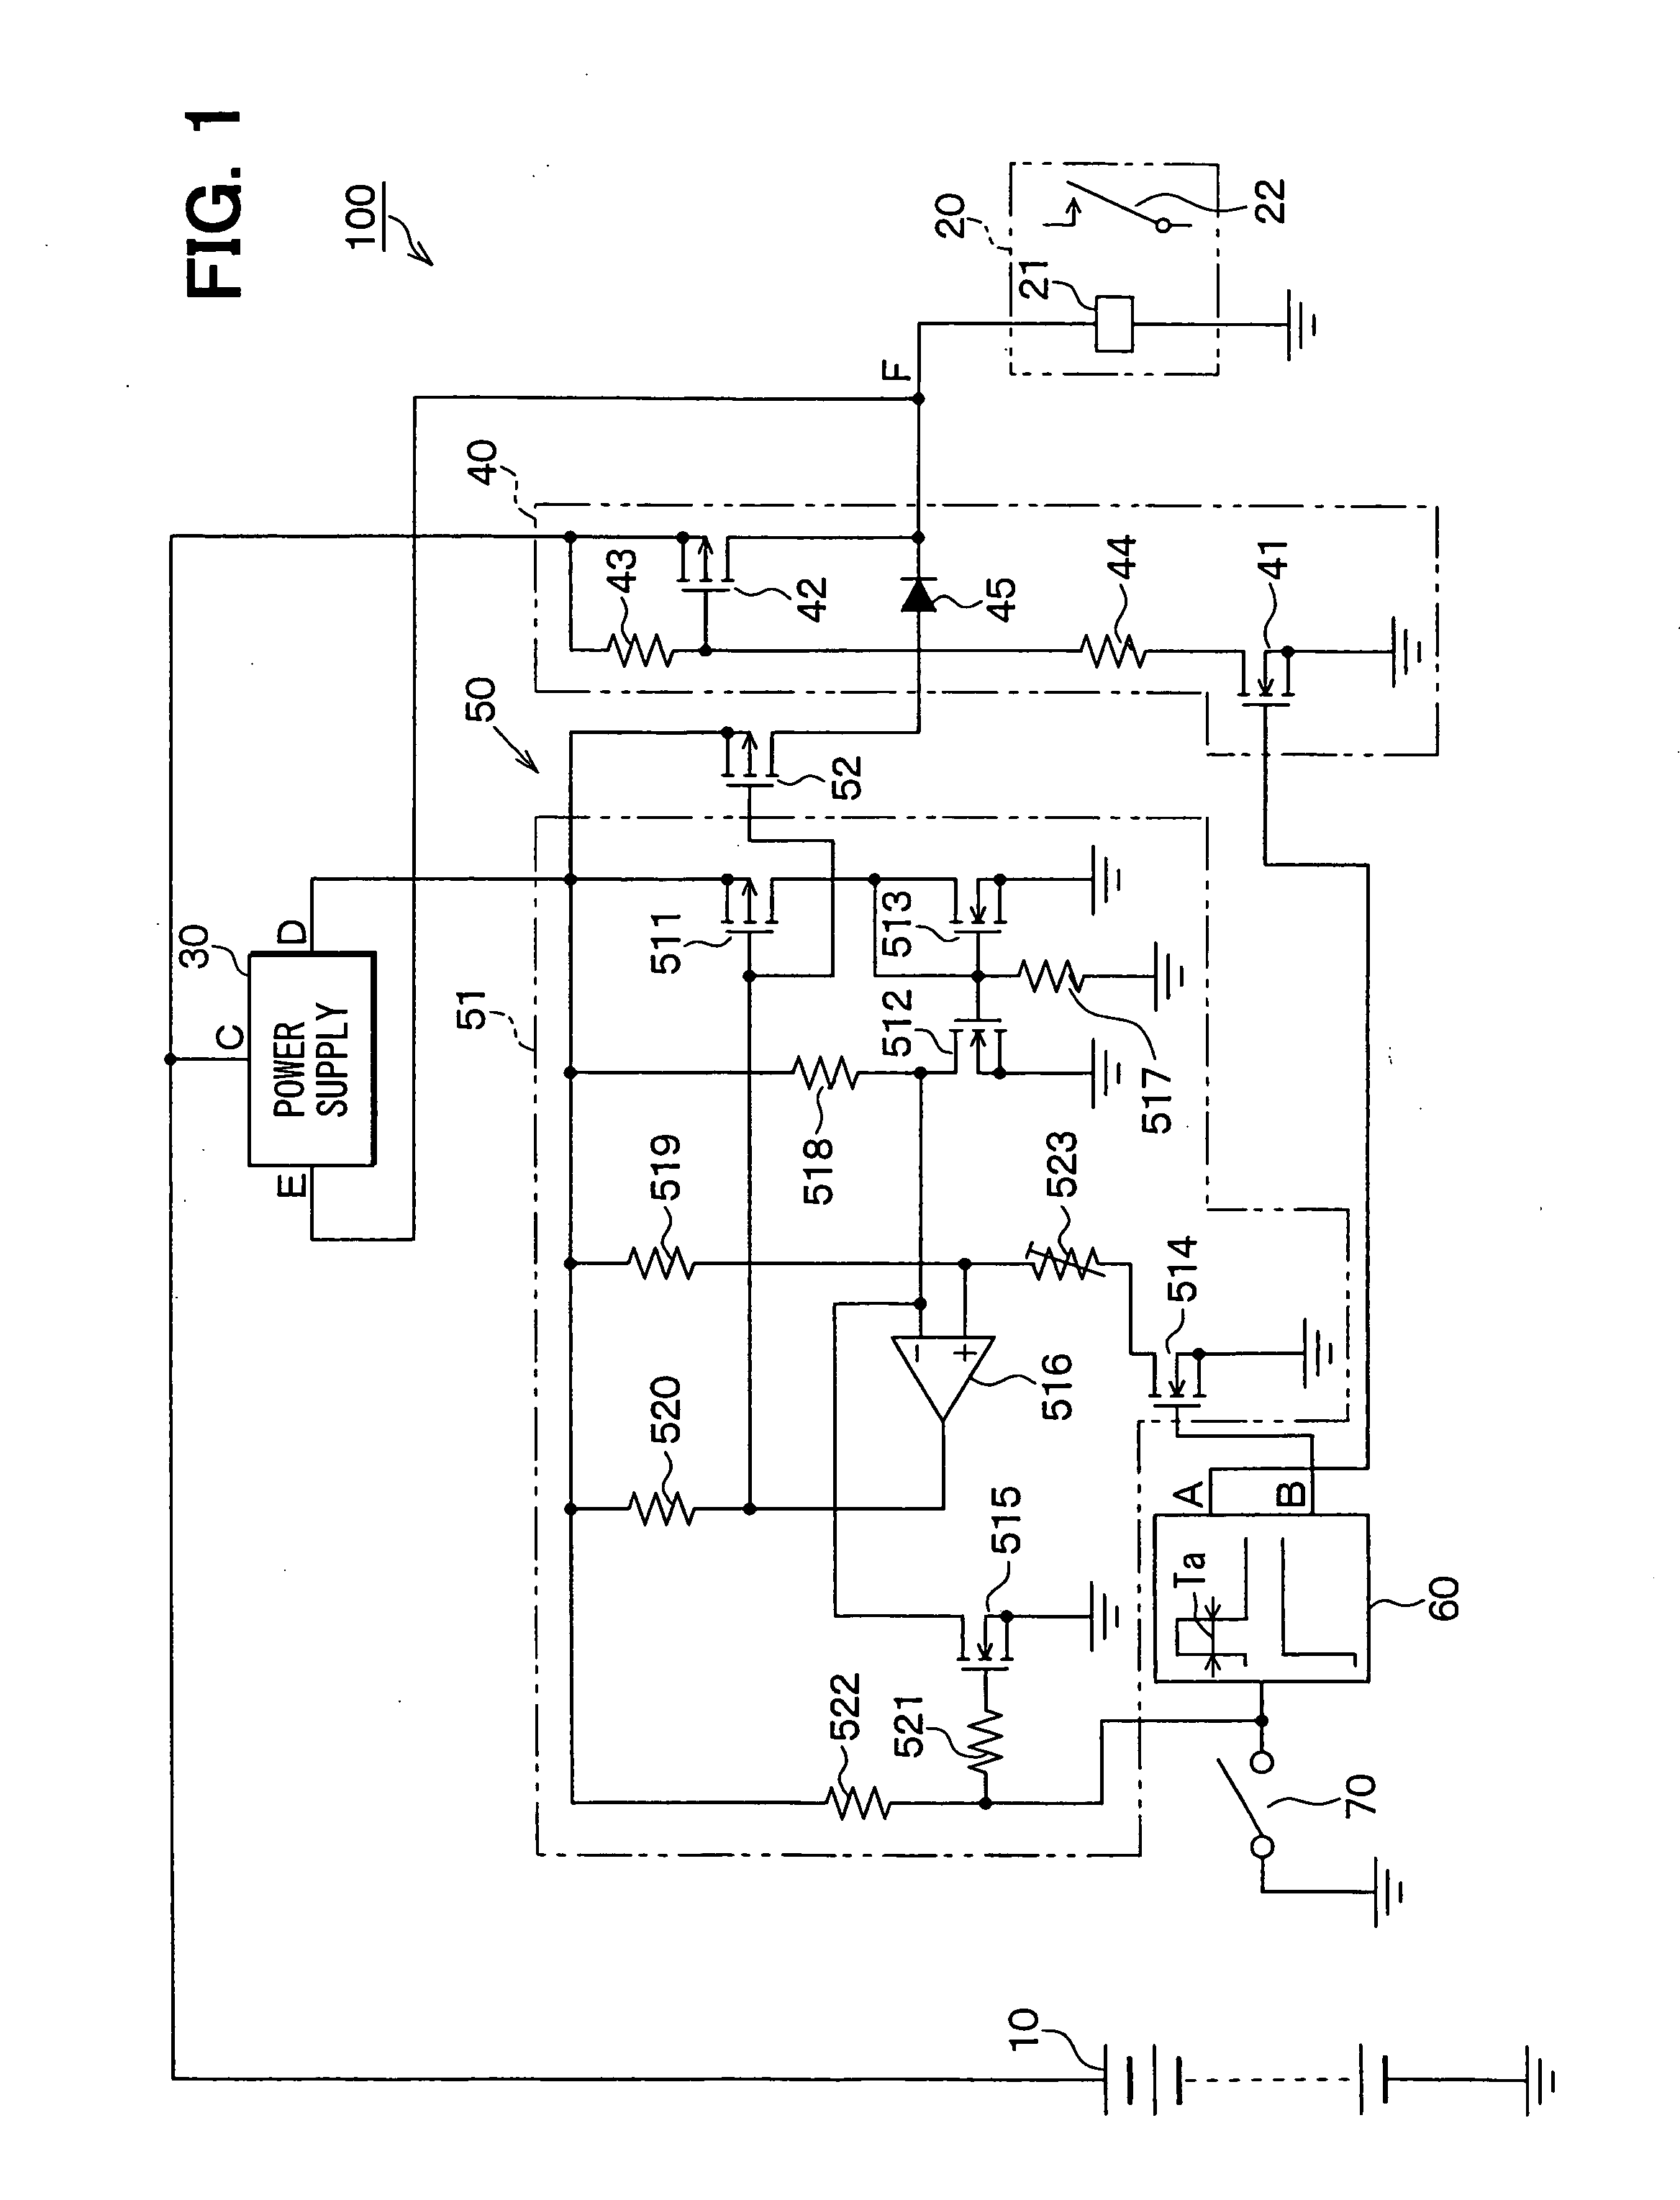 Constant current relay drive circuit